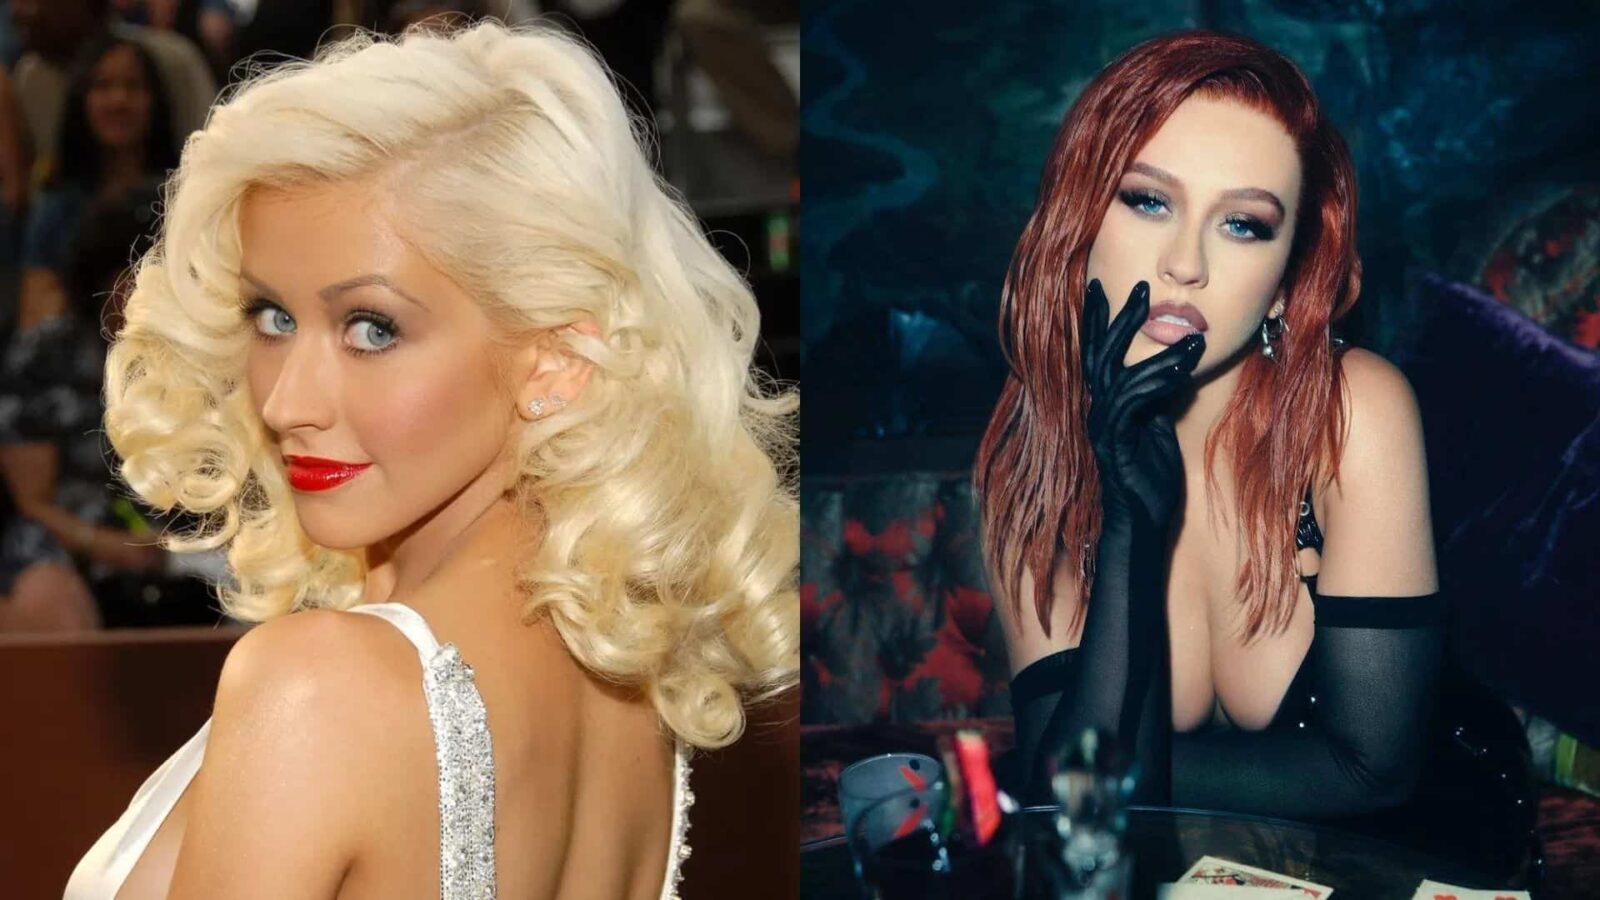 Christina Aguilera Has Vibrant Red Hair in Her New Music Video